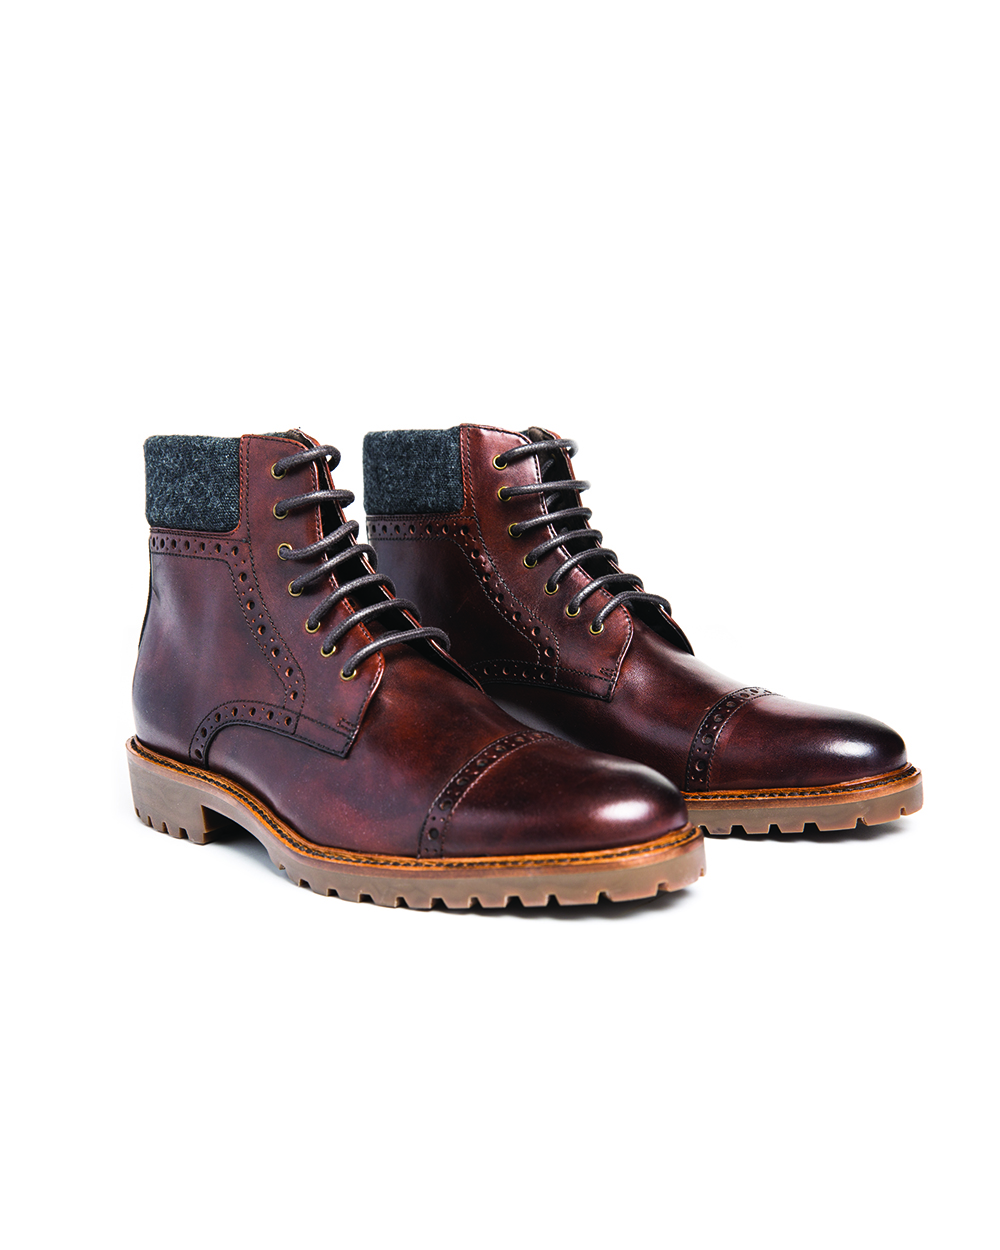 Barkers leather boots, $279.